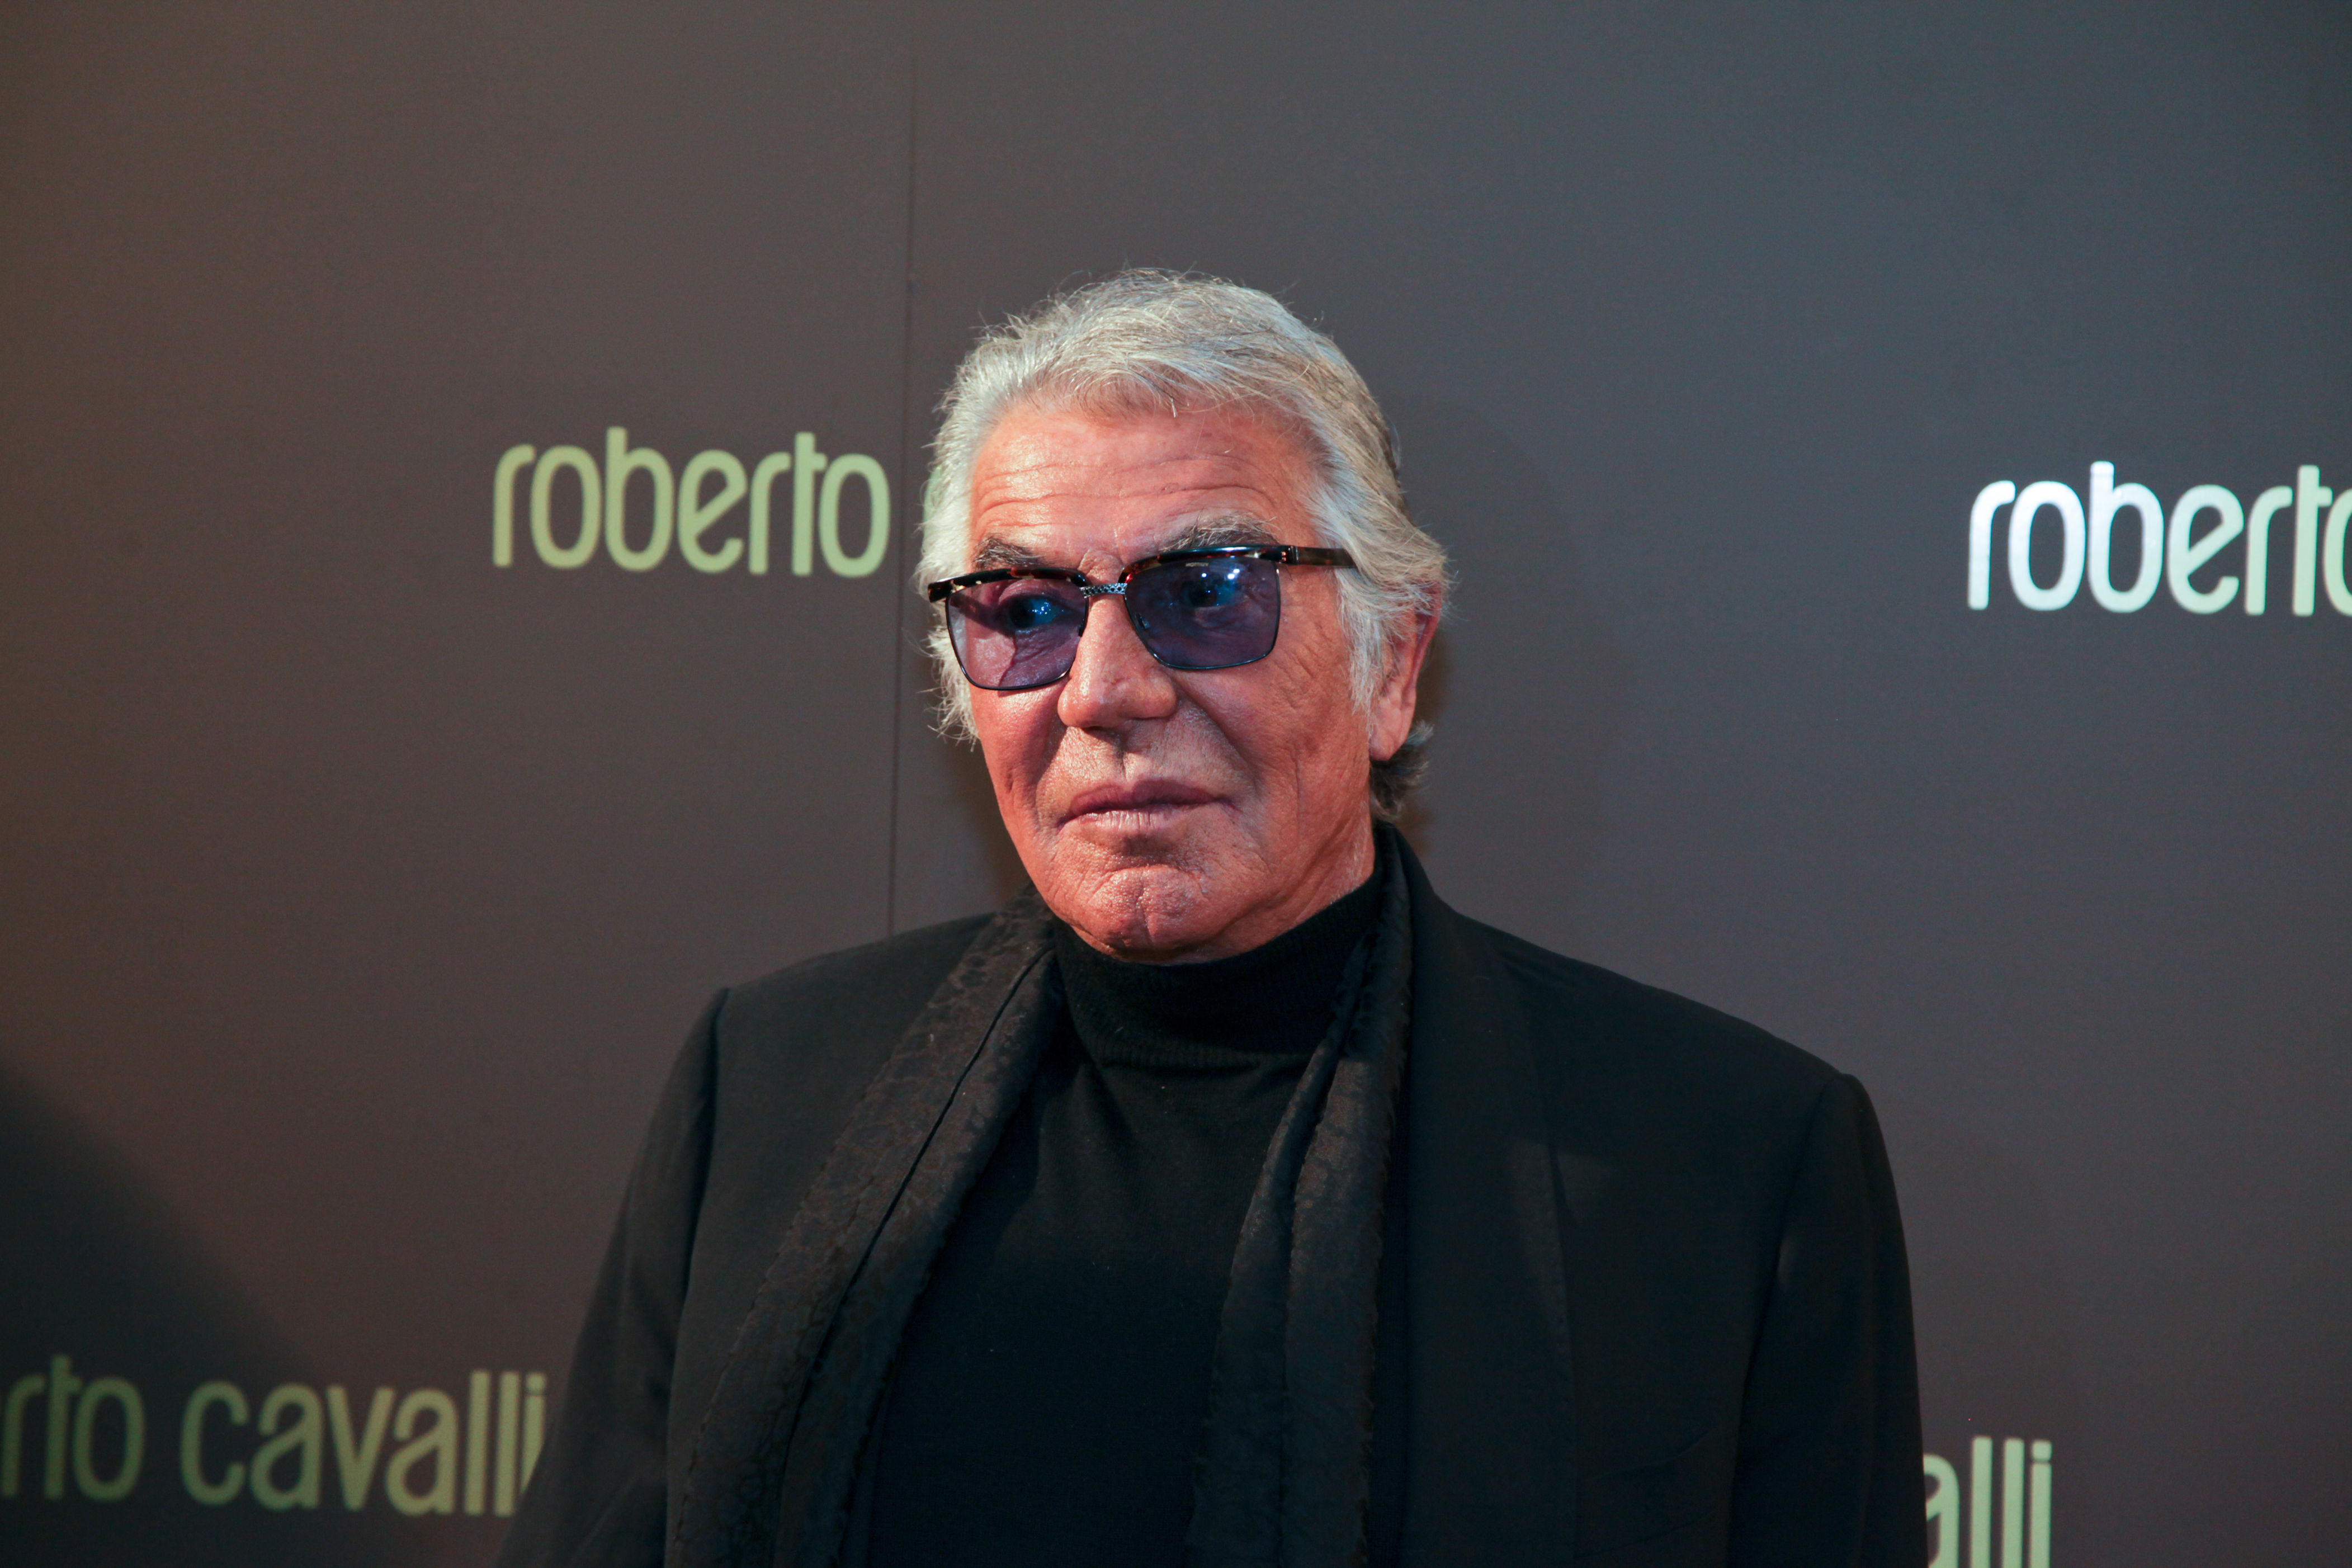 farewell to a fashion icon: roberto cavalli, pioneer of opulent style, passes away at 83